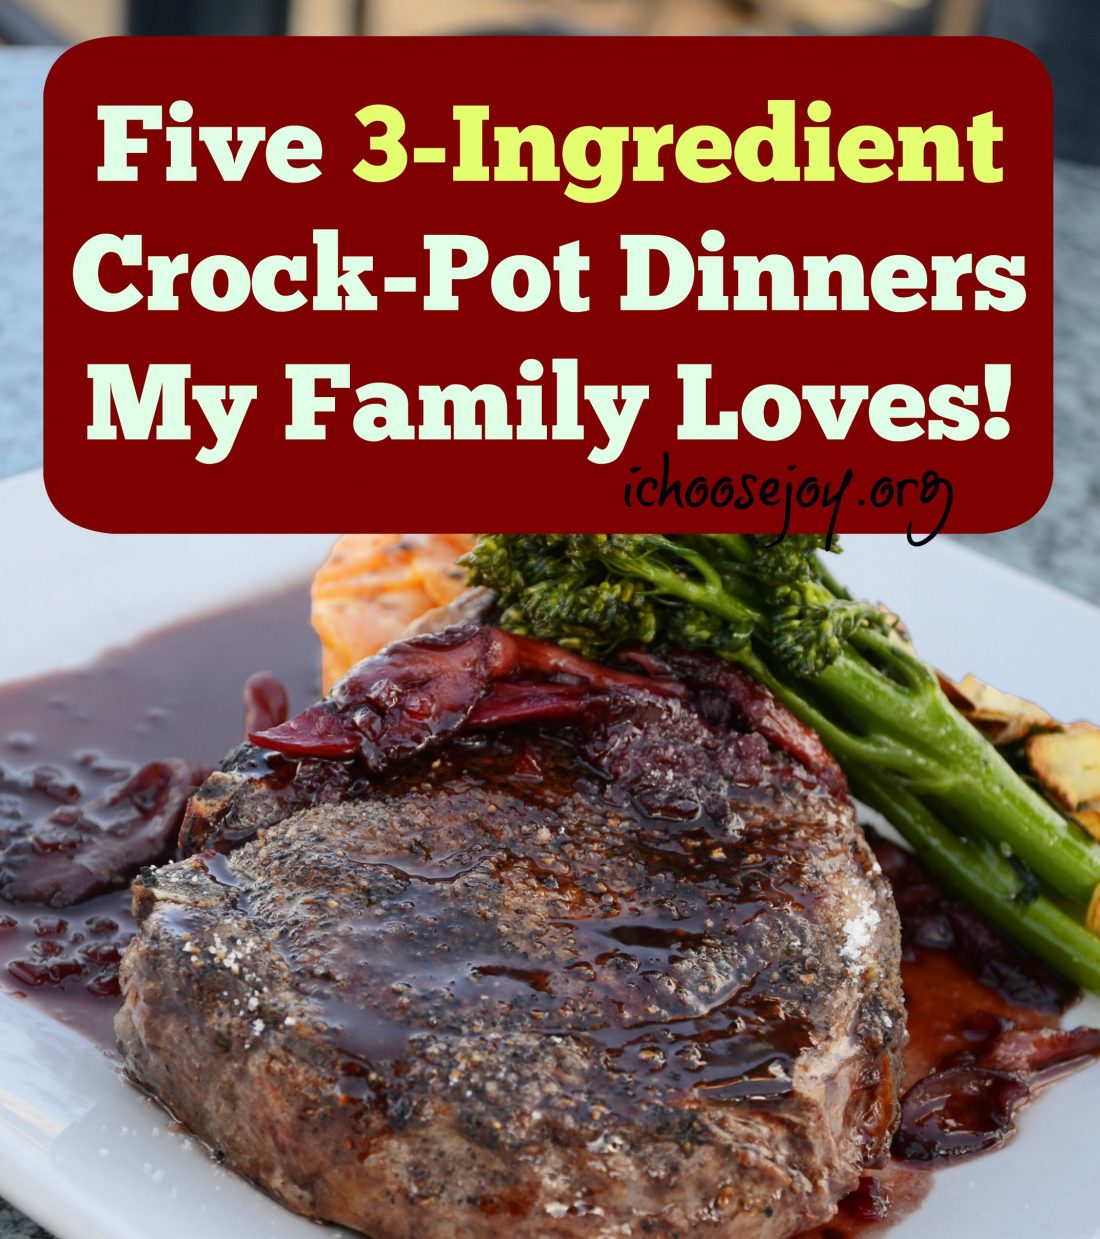 Five 3-Ingredient Crock-Pot Dinners My Family Loves!